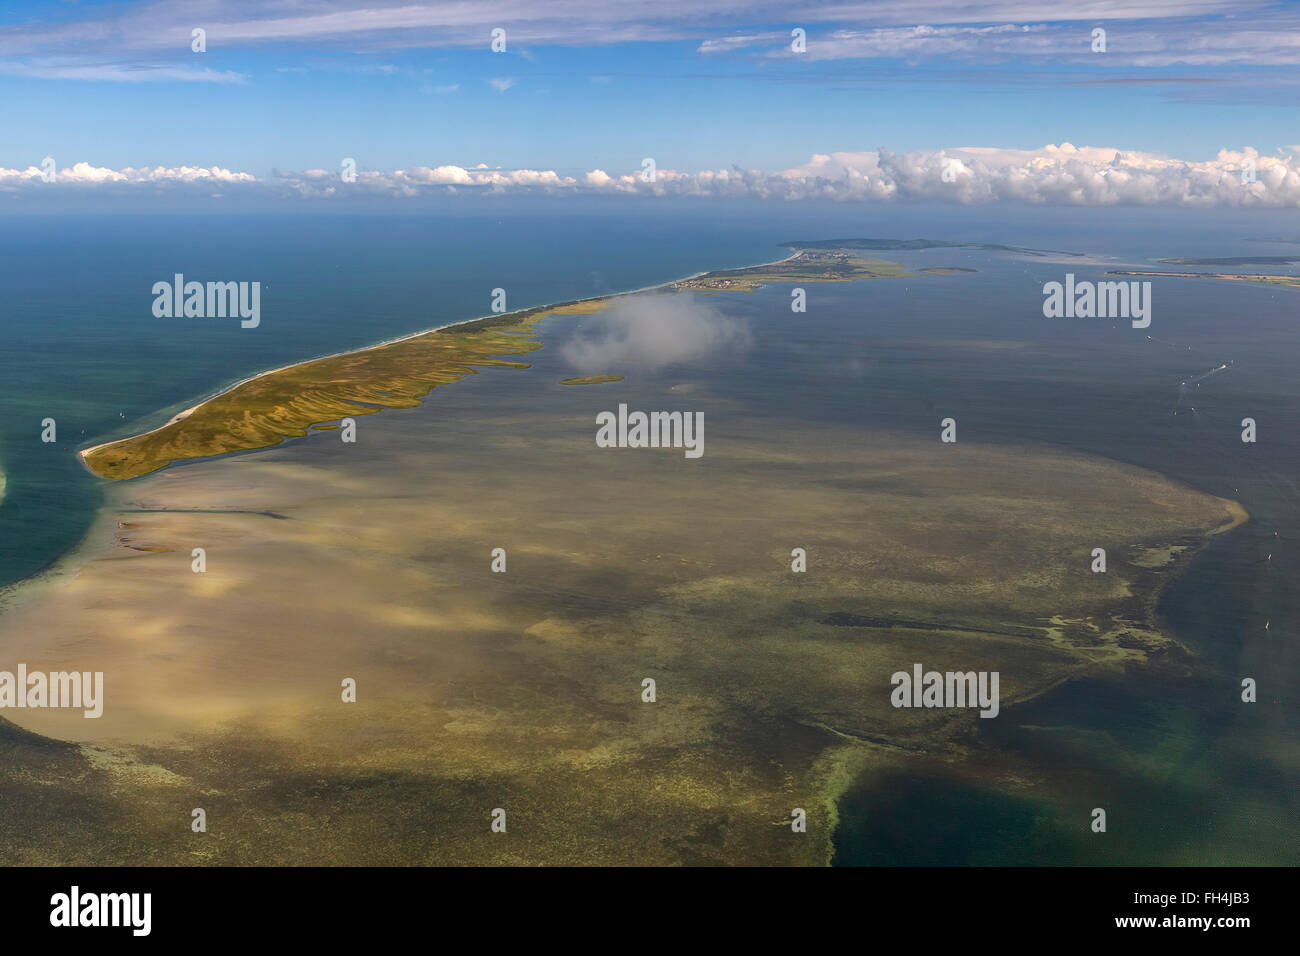 Aerial view, south of the island Hiddensee, nature reserves and yells Gänsewerder, Prohn, Baltic island, clouds, Stock Photo